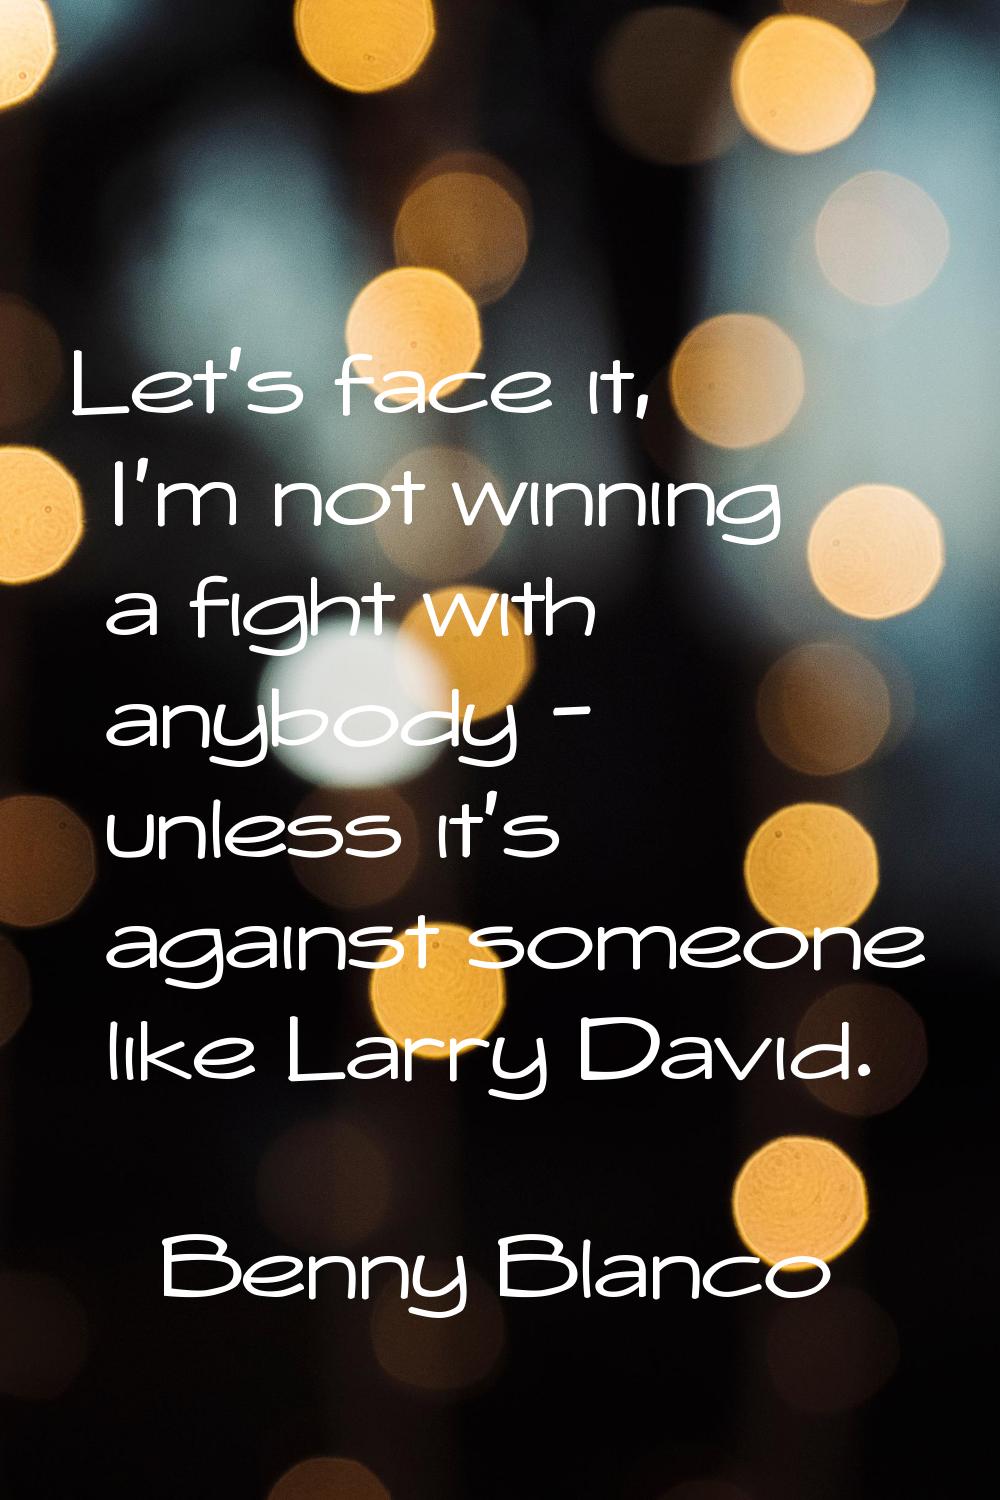 Let's face it, I'm not winning a fight with anybody - unless it's against someone like Larry David.